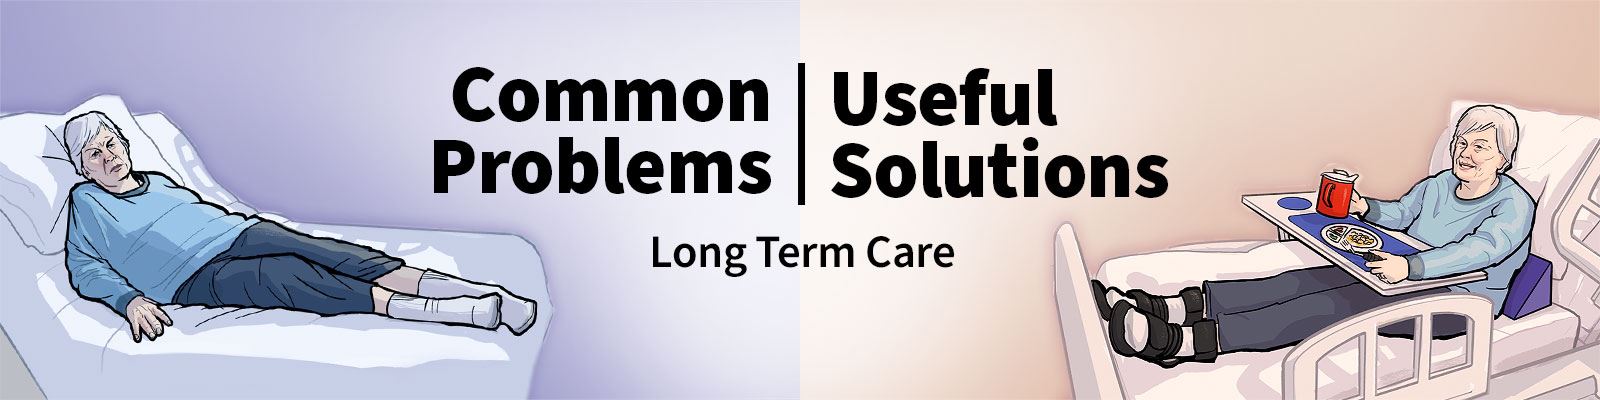 Common Problems Useful Solutions